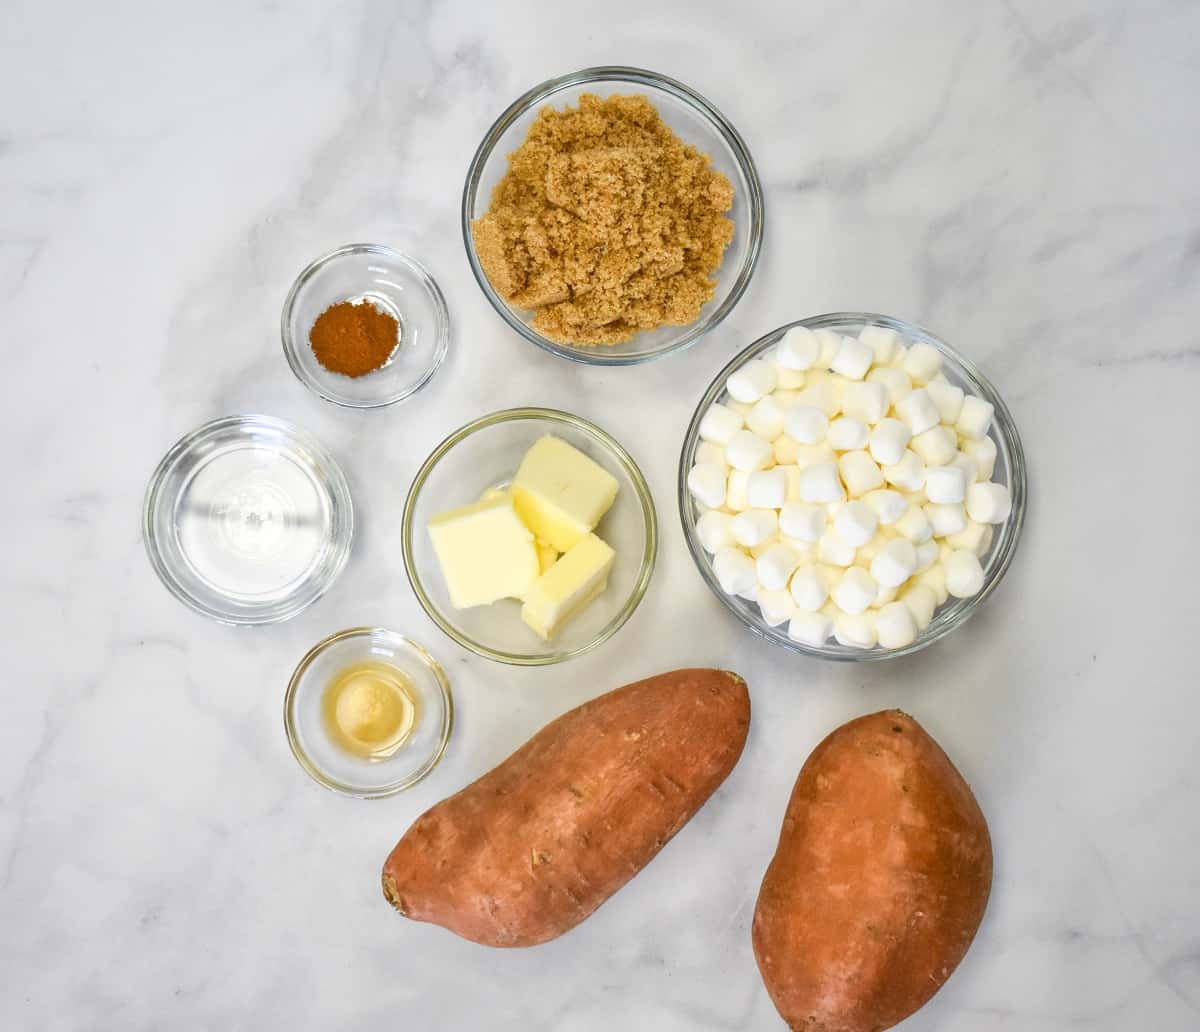 Two sweet potatoes and the rest of the ingredients for the recipe in clear glass bowls all arranged on a white table.